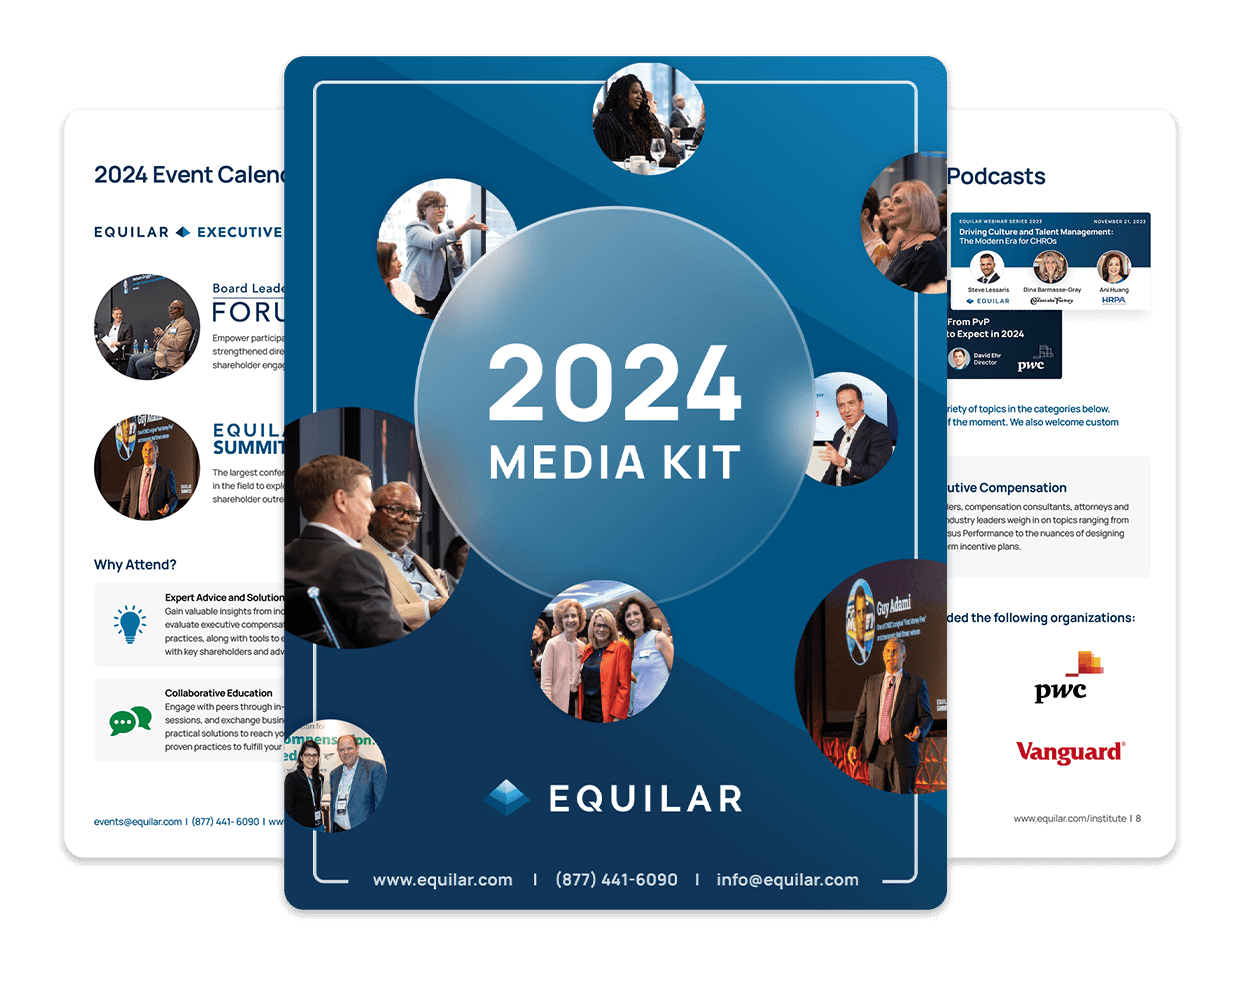 Discover the various integrated marketing communications tools we offer to reach the C-suite and boardroom with the Equilar 2024 Media Kit